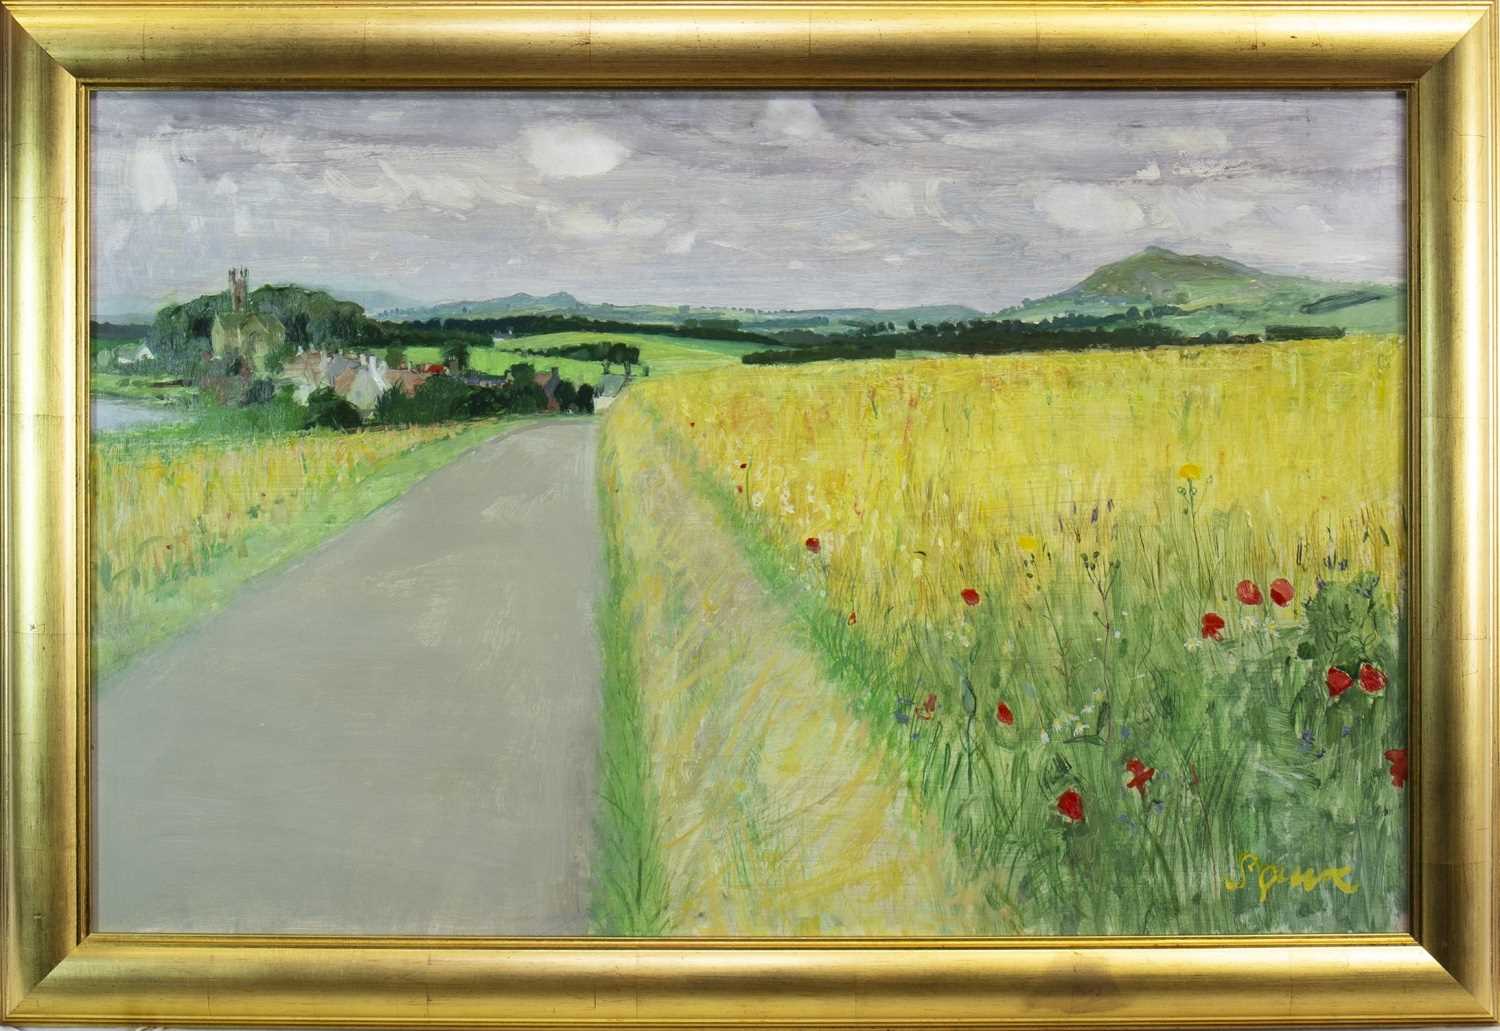 Lot 588 - RURAL SCENE, AN OIL BY GEOFF SQUIRE